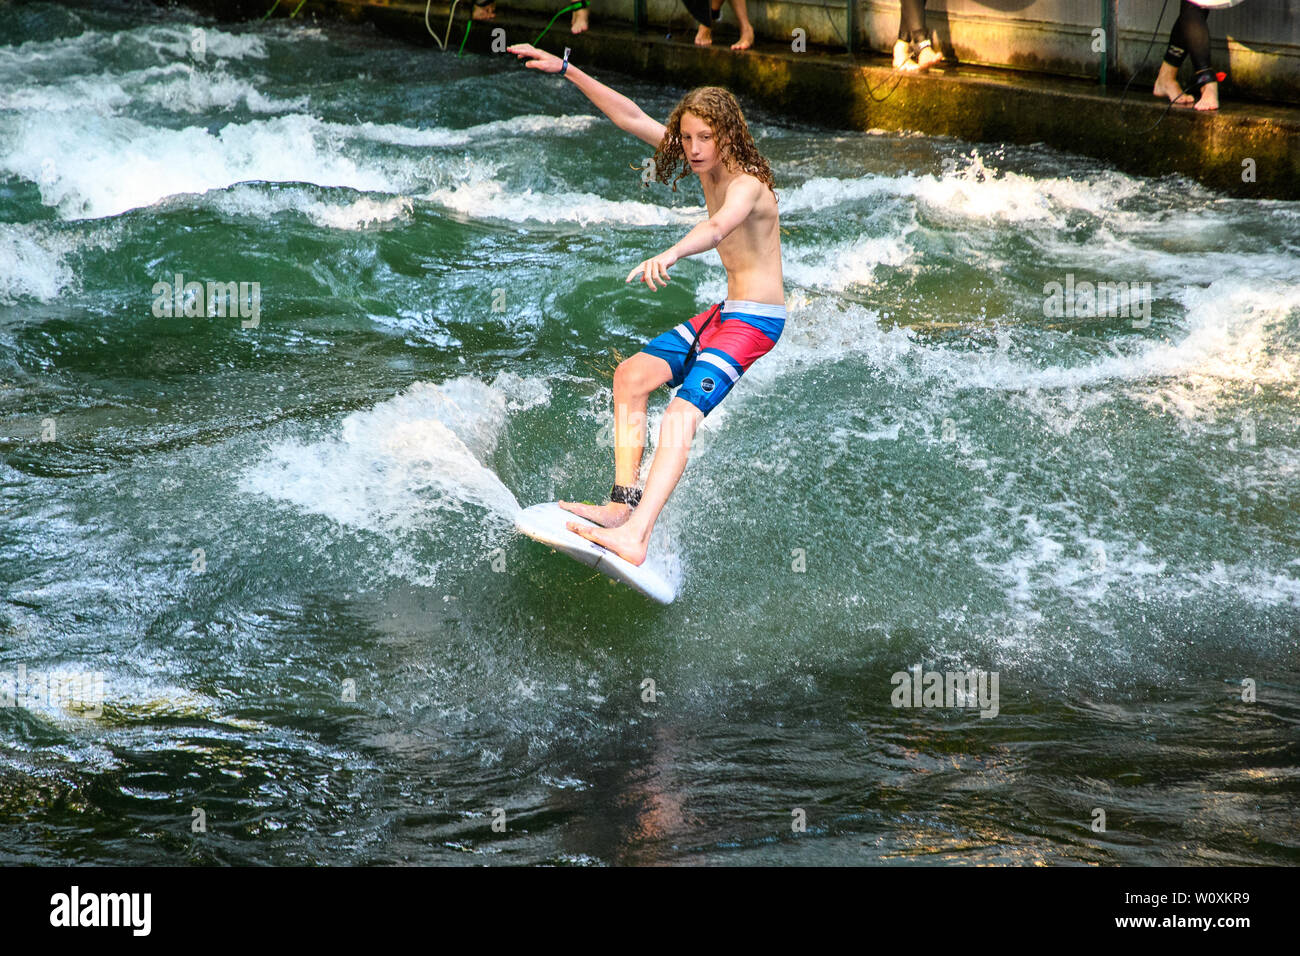 MUNICH, GERMANY - August 2018: Surfers train on a standing wave in a stream in the city Park during the heat wave. Stock Photo